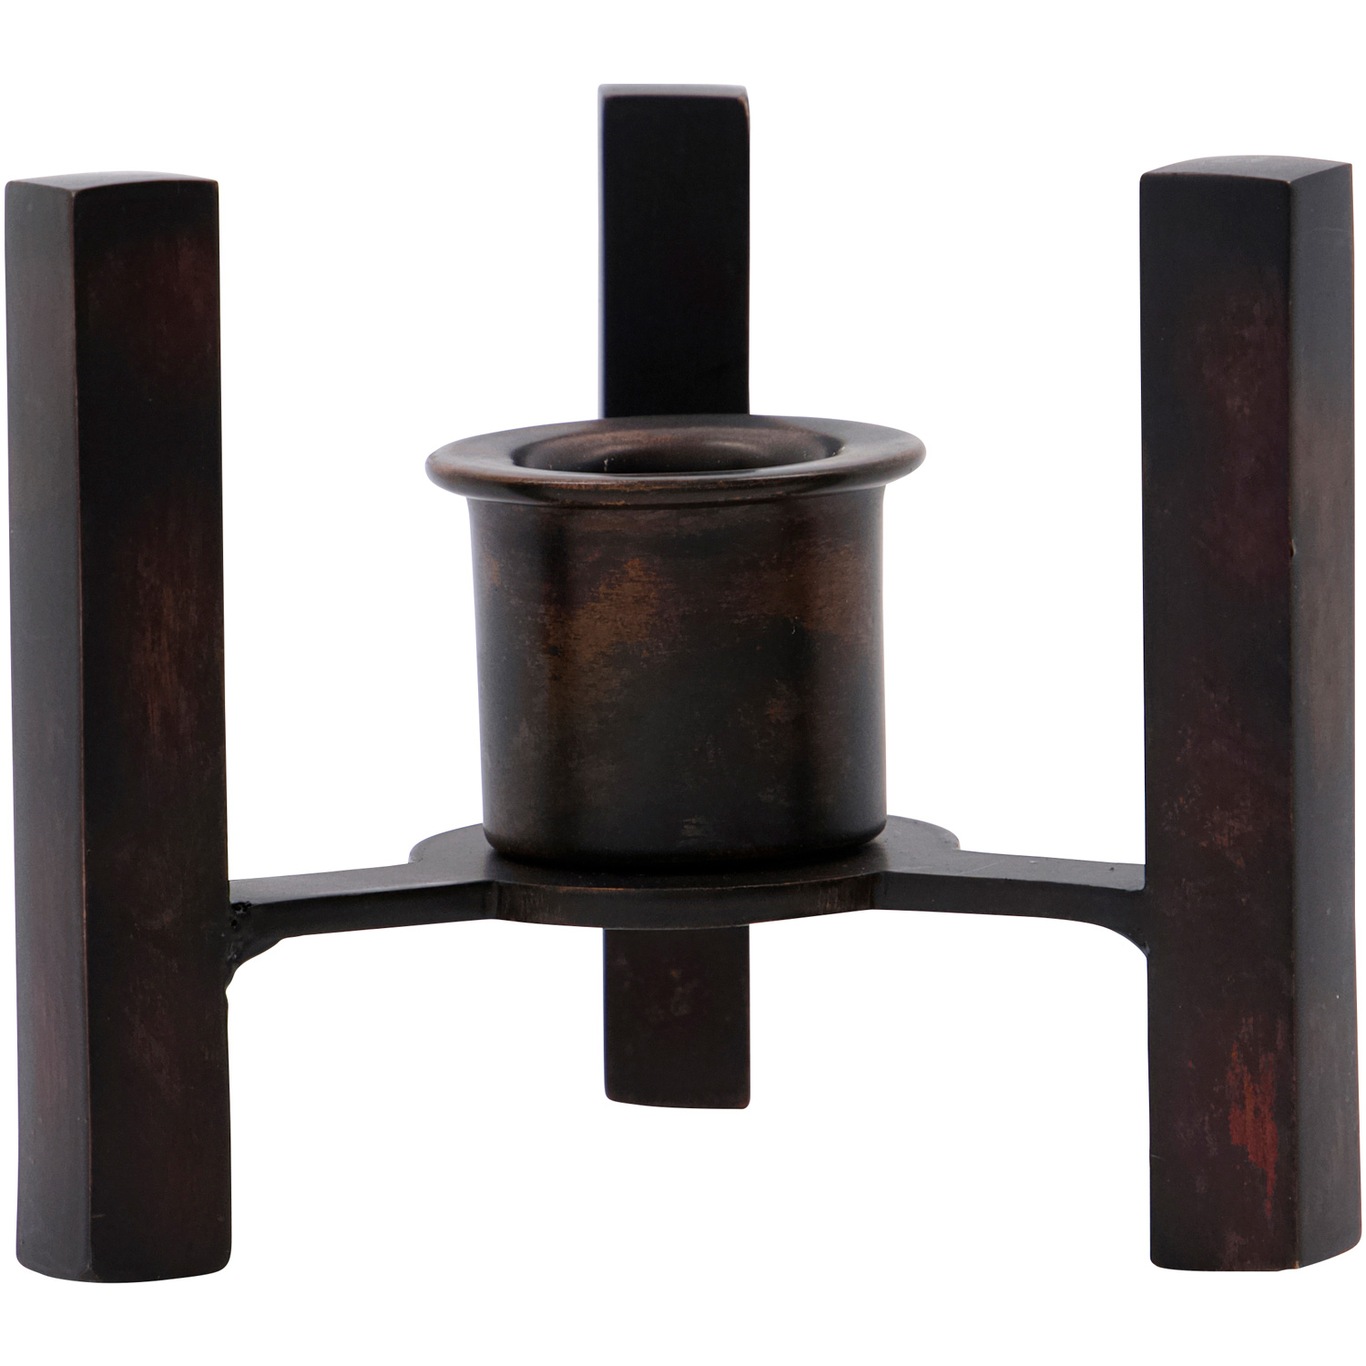 Bejo Candle Stand Antique Brown, 10x8x8 cm